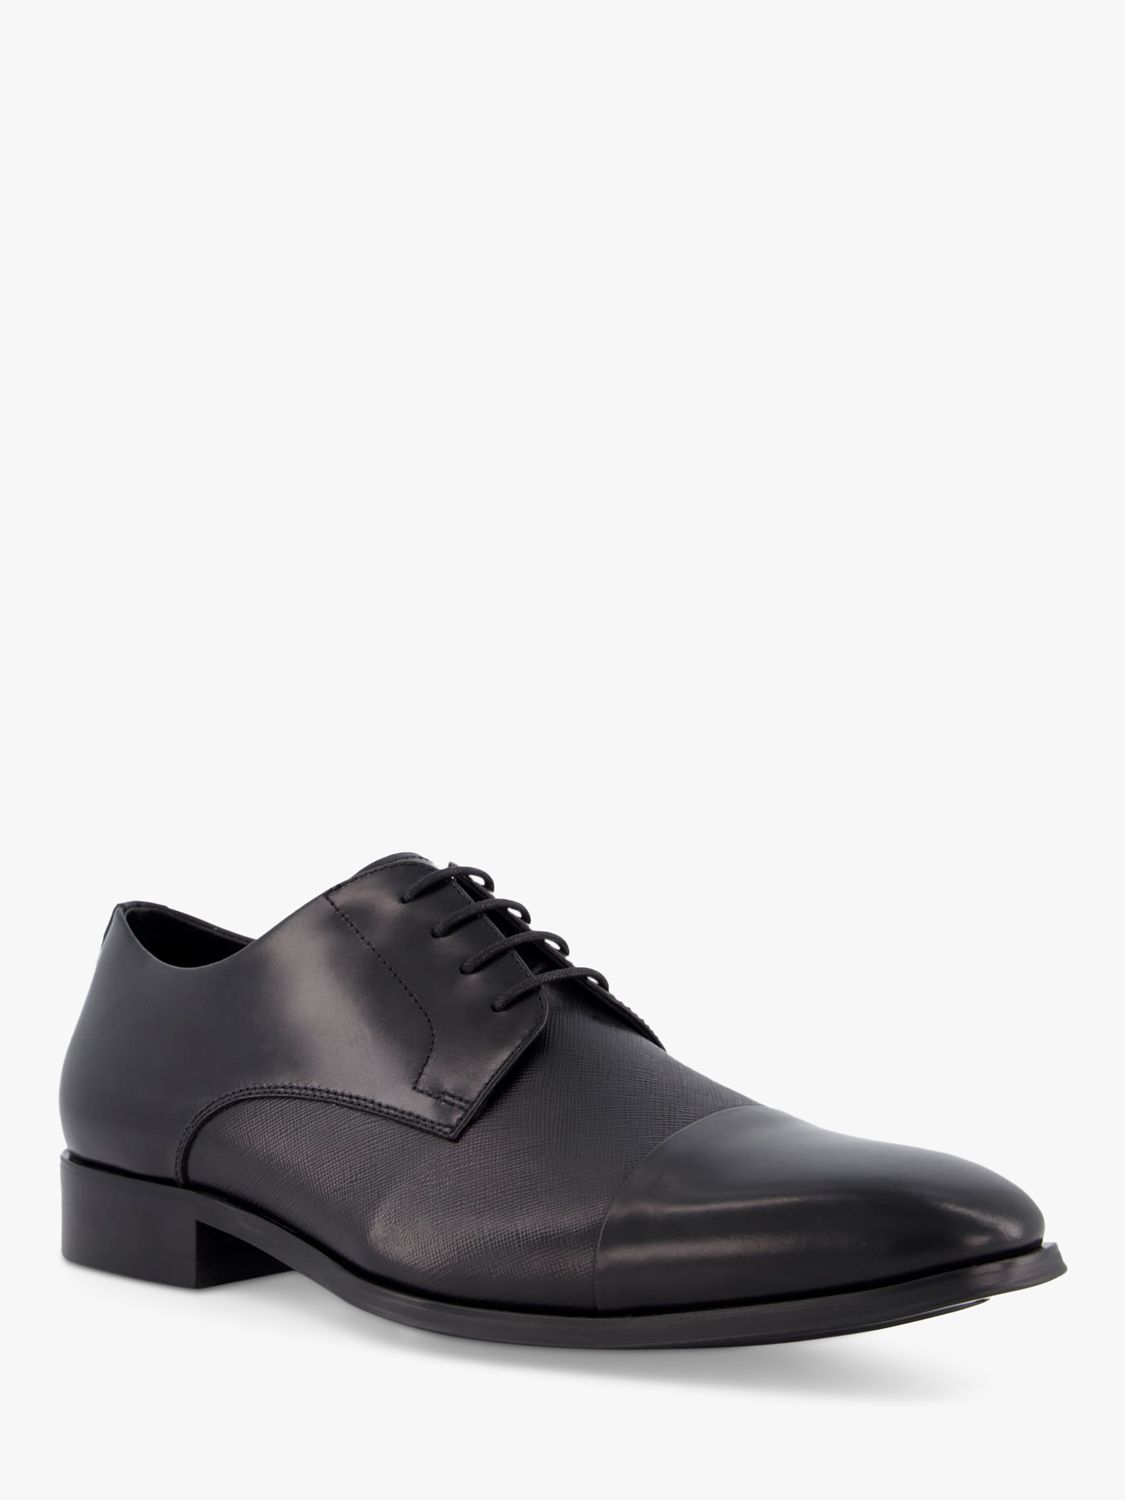 Buy Dune Sheet Leather Lace Up Shoes Online at johnlewis.com